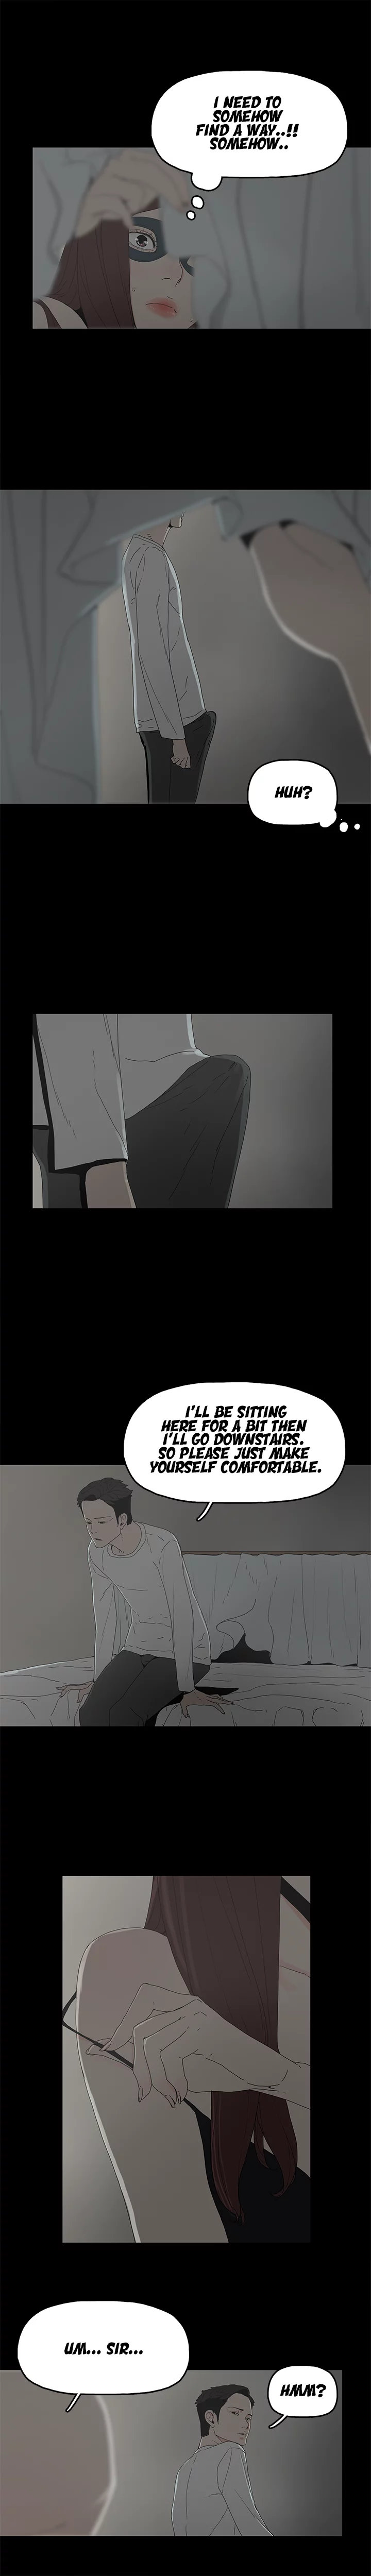 Surrogate Mother - Chapter 5 Page 6